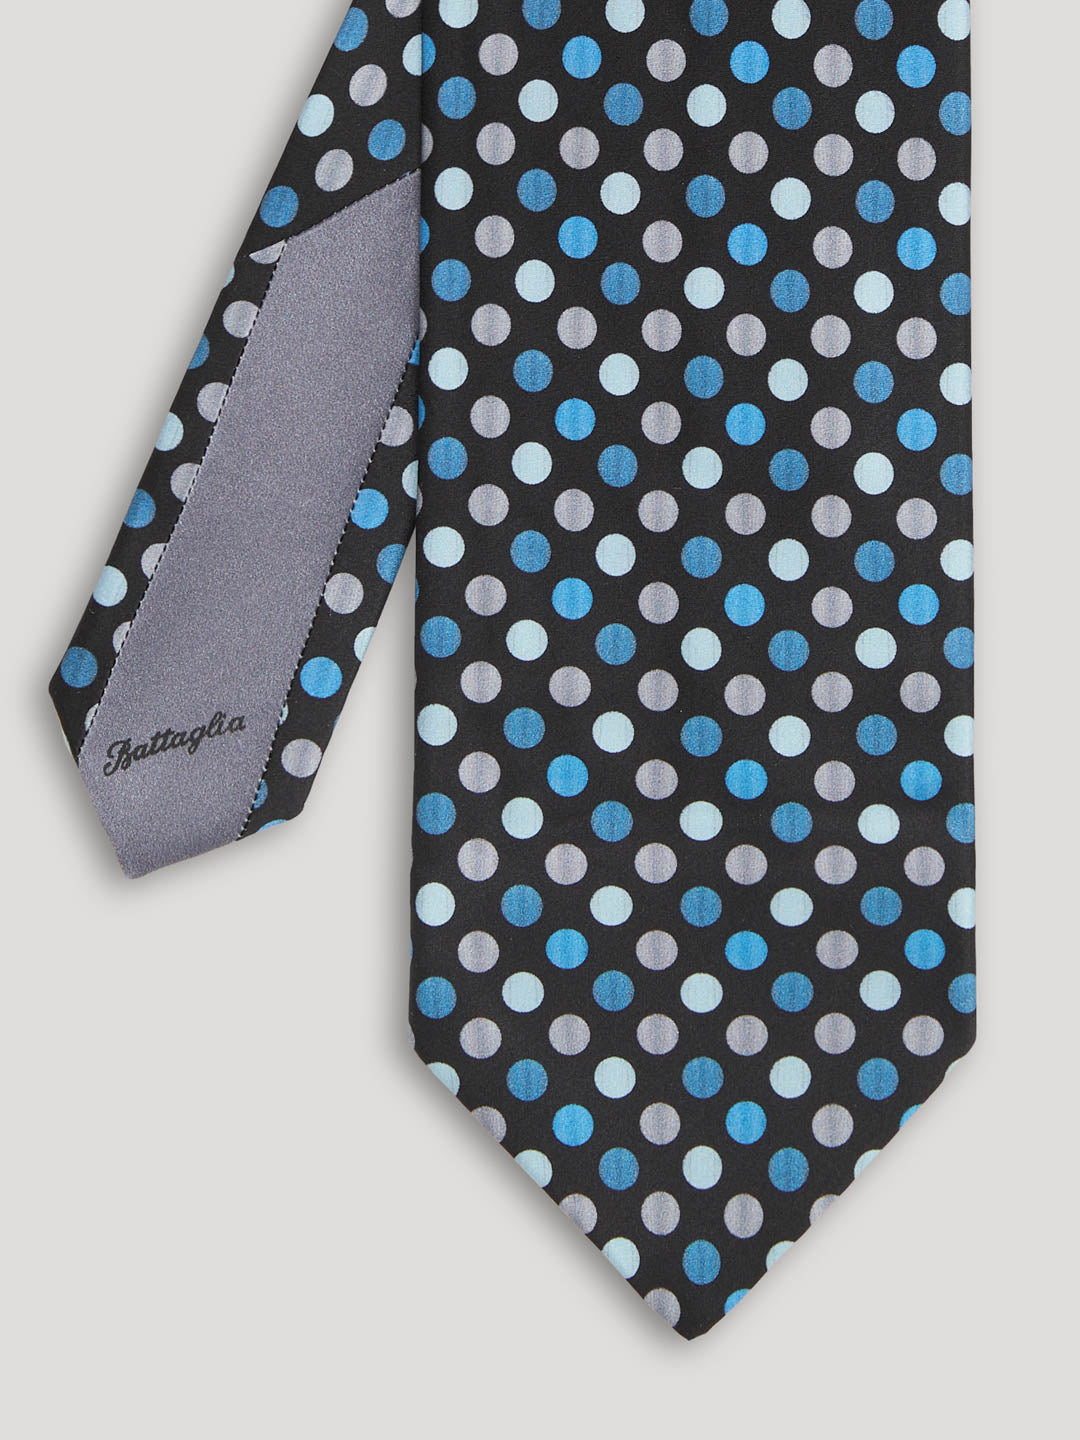 Black tie with blue and gray polkadots. 